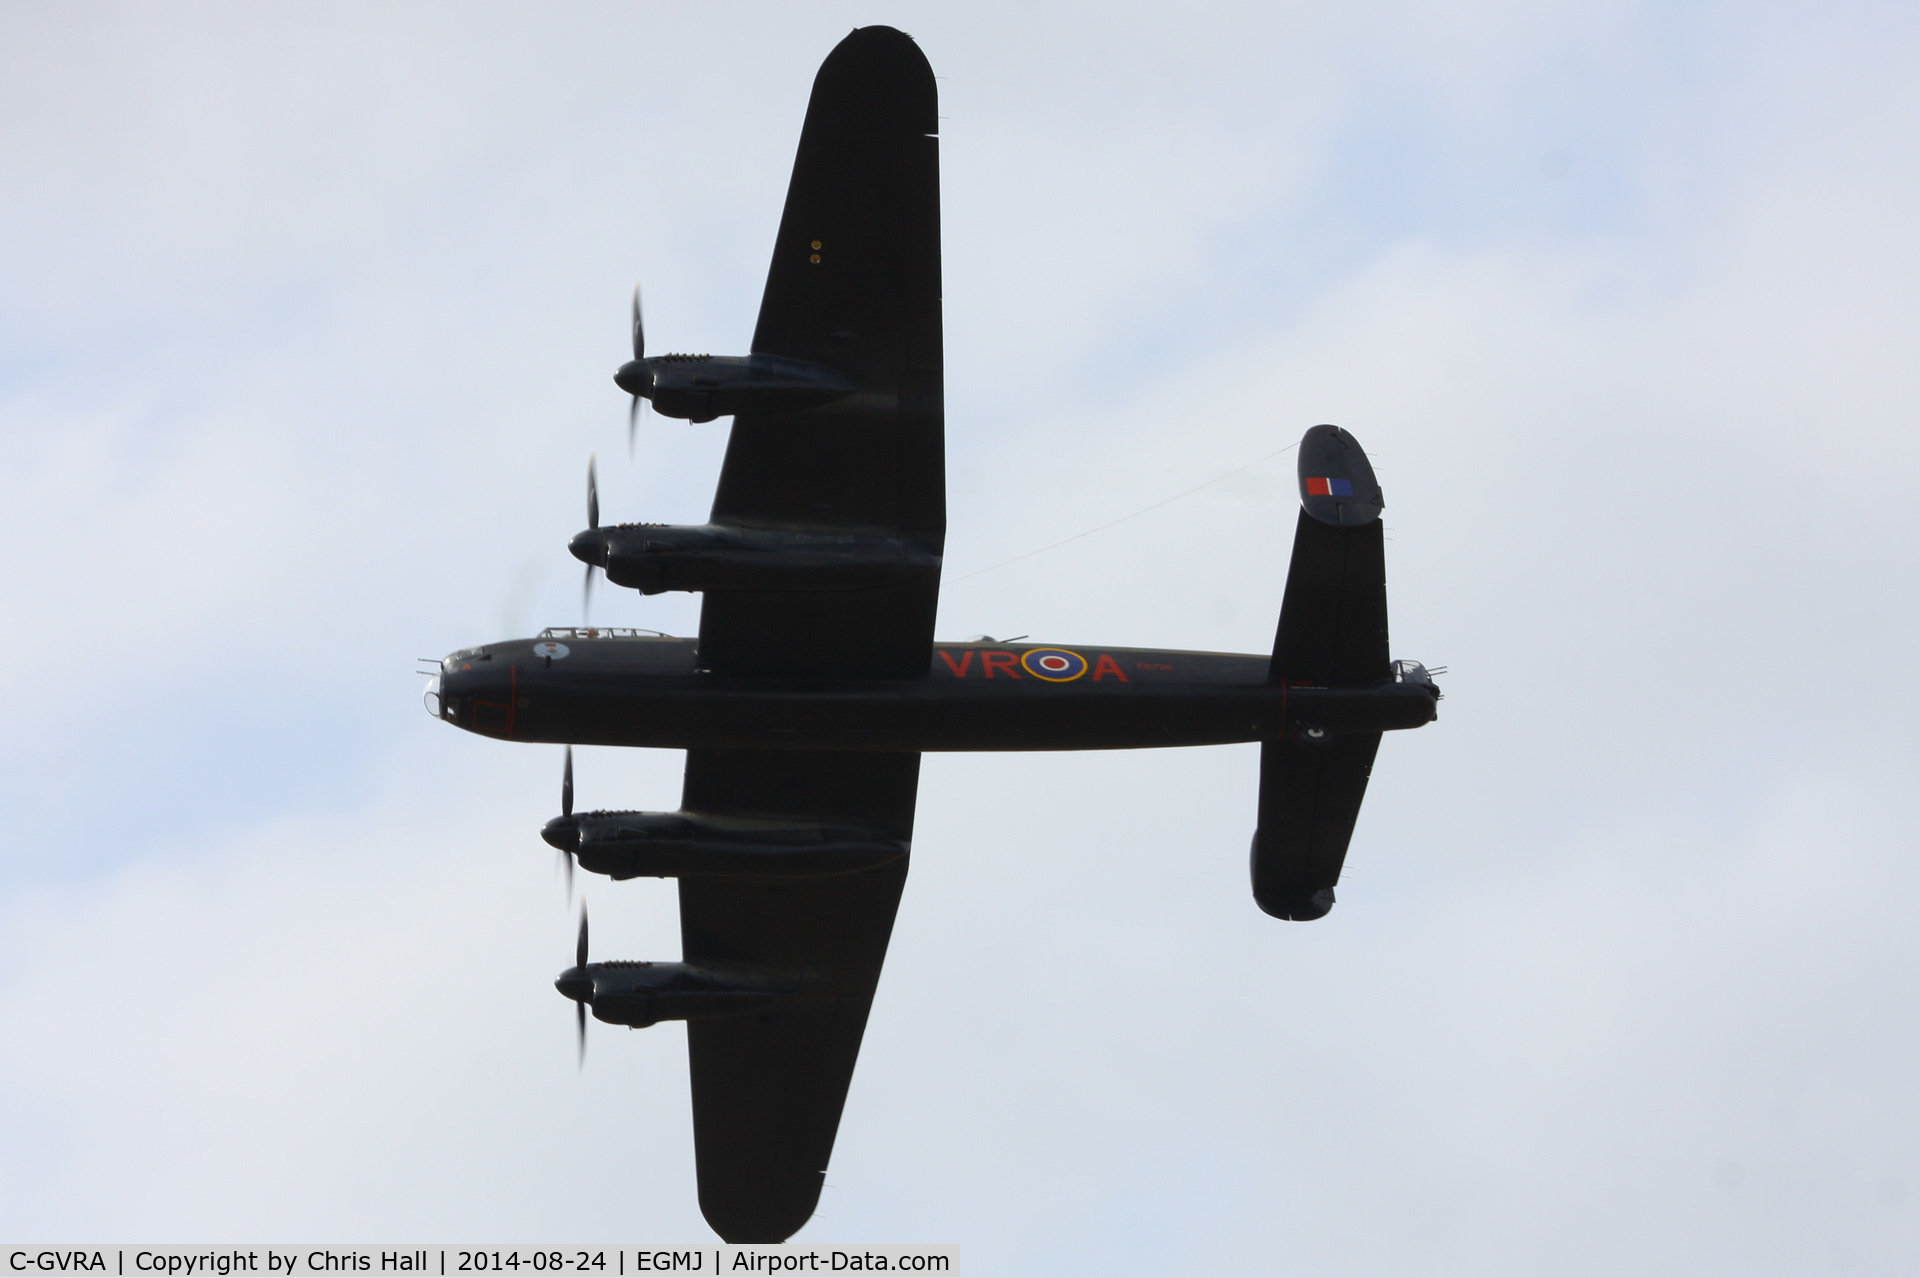 C-GVRA, 1945 Victory Aircraft Avro 683 Lancaster BX C/N FM 213 (3414), at the Little Gransden Airshow 2014